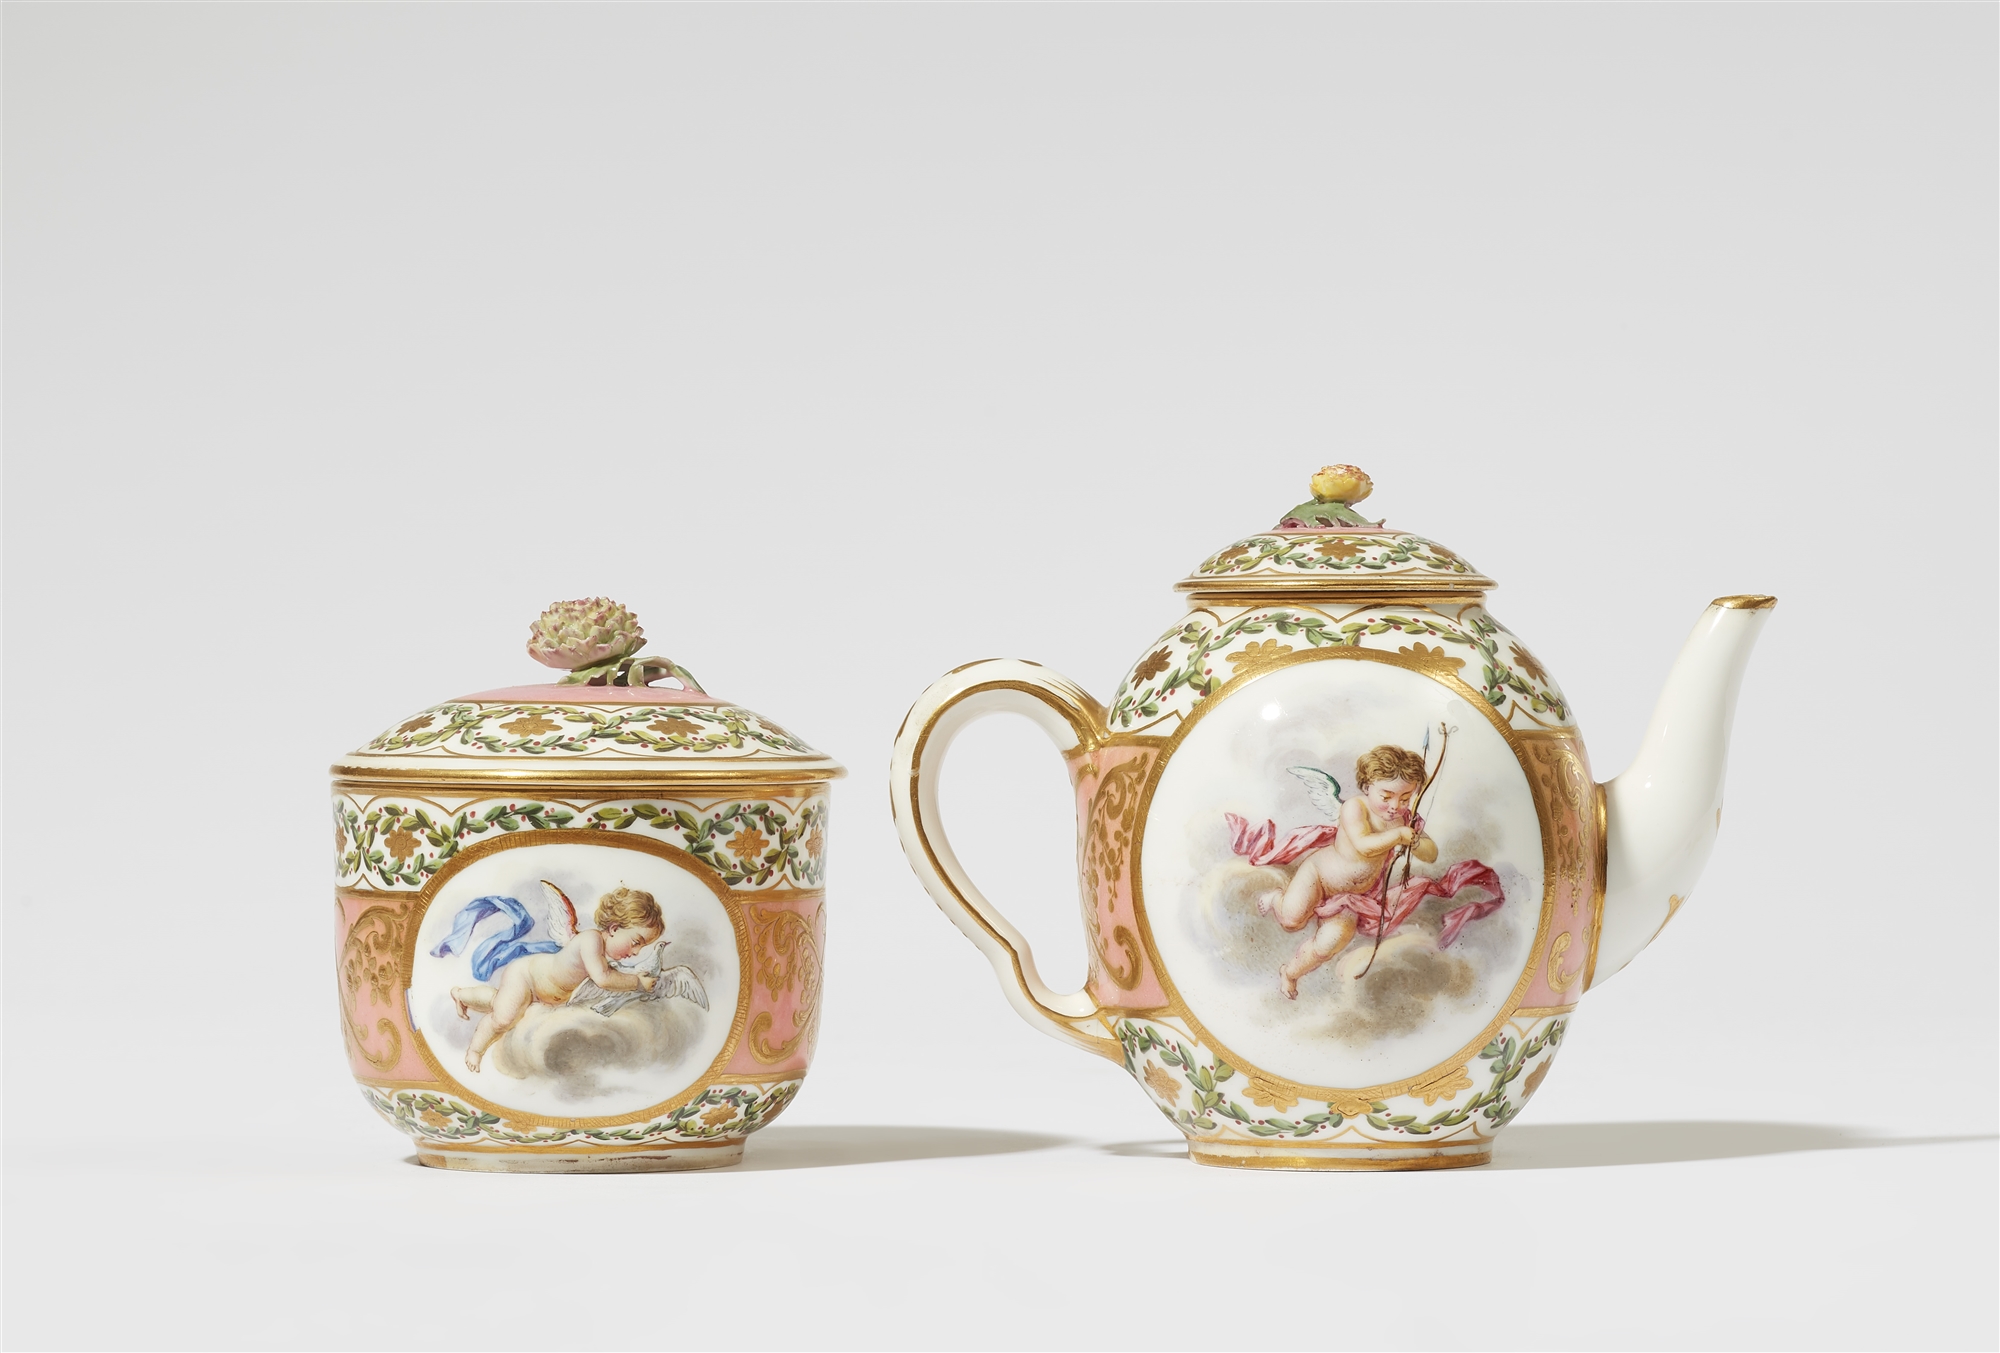 A Sèvres soft porcelain teapot and sugar box with putti - Image 2 of 4